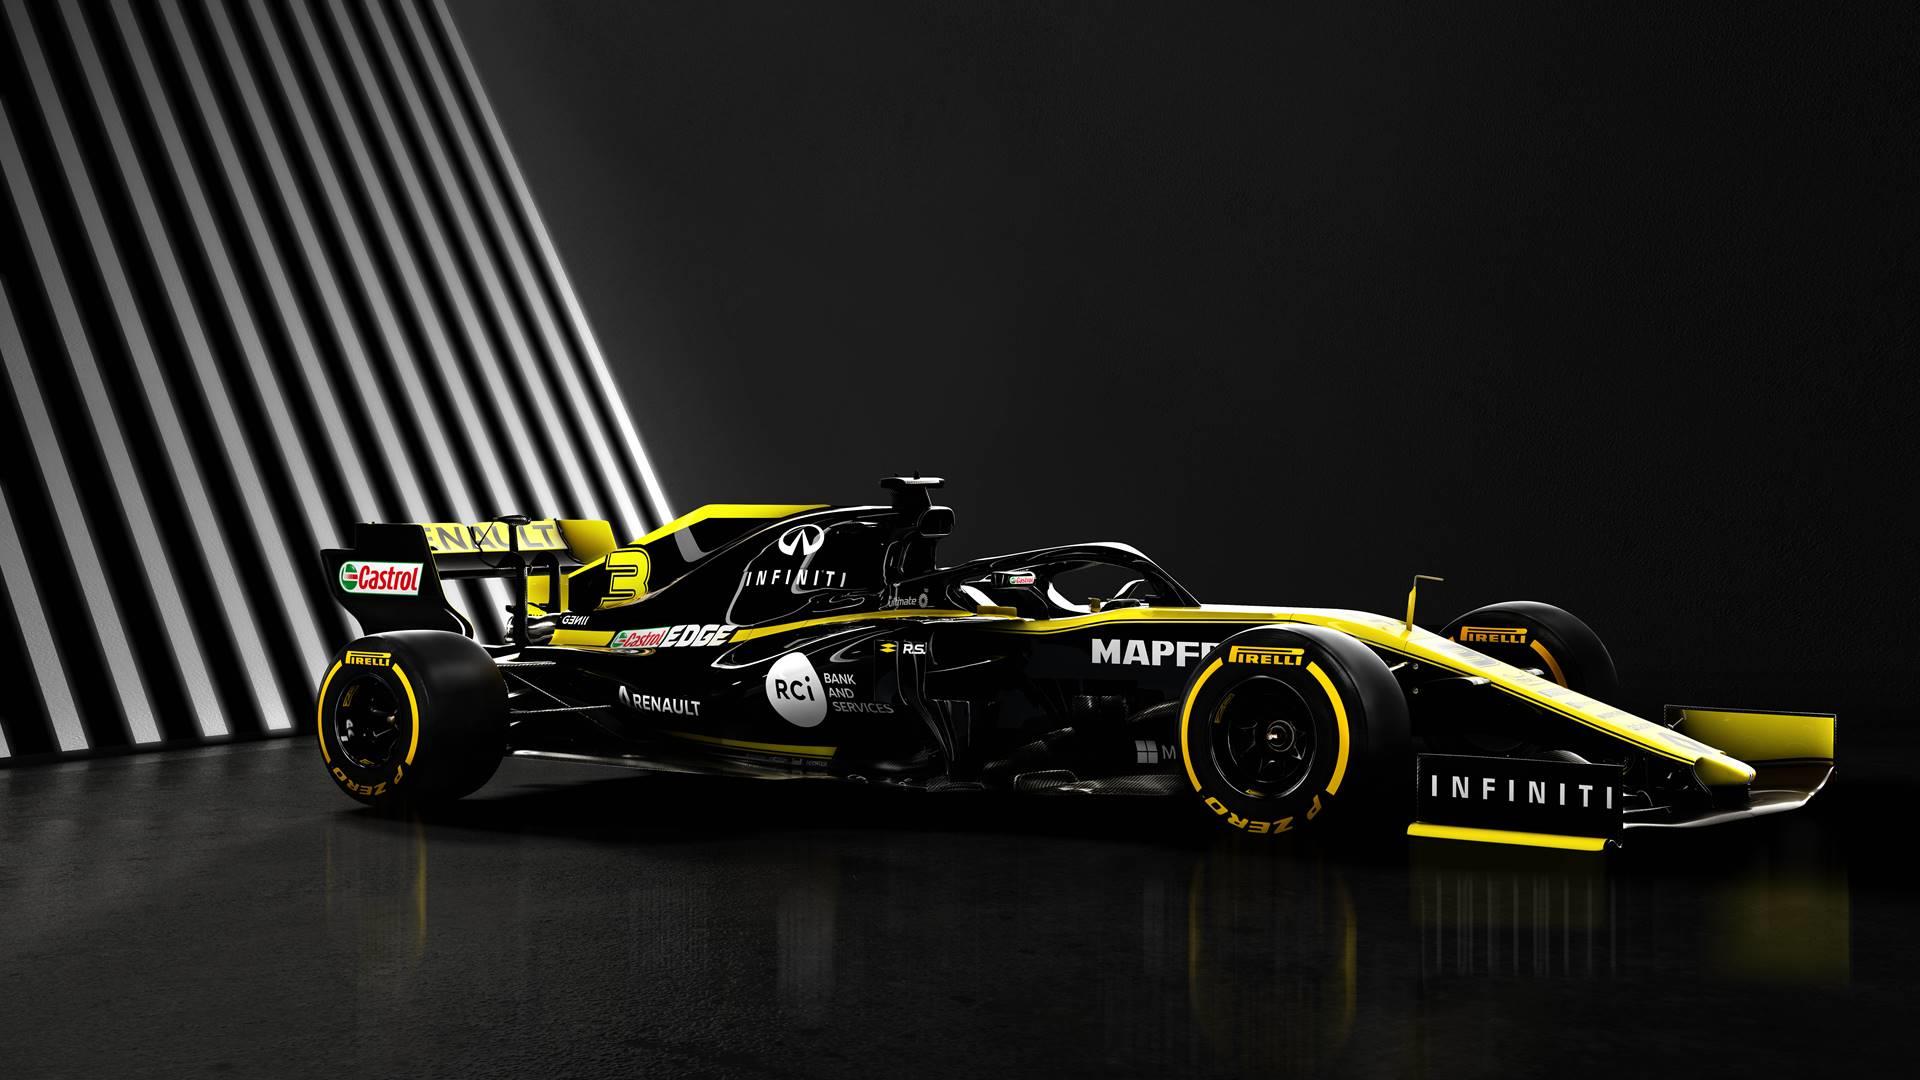 2019 Renault R.S.19